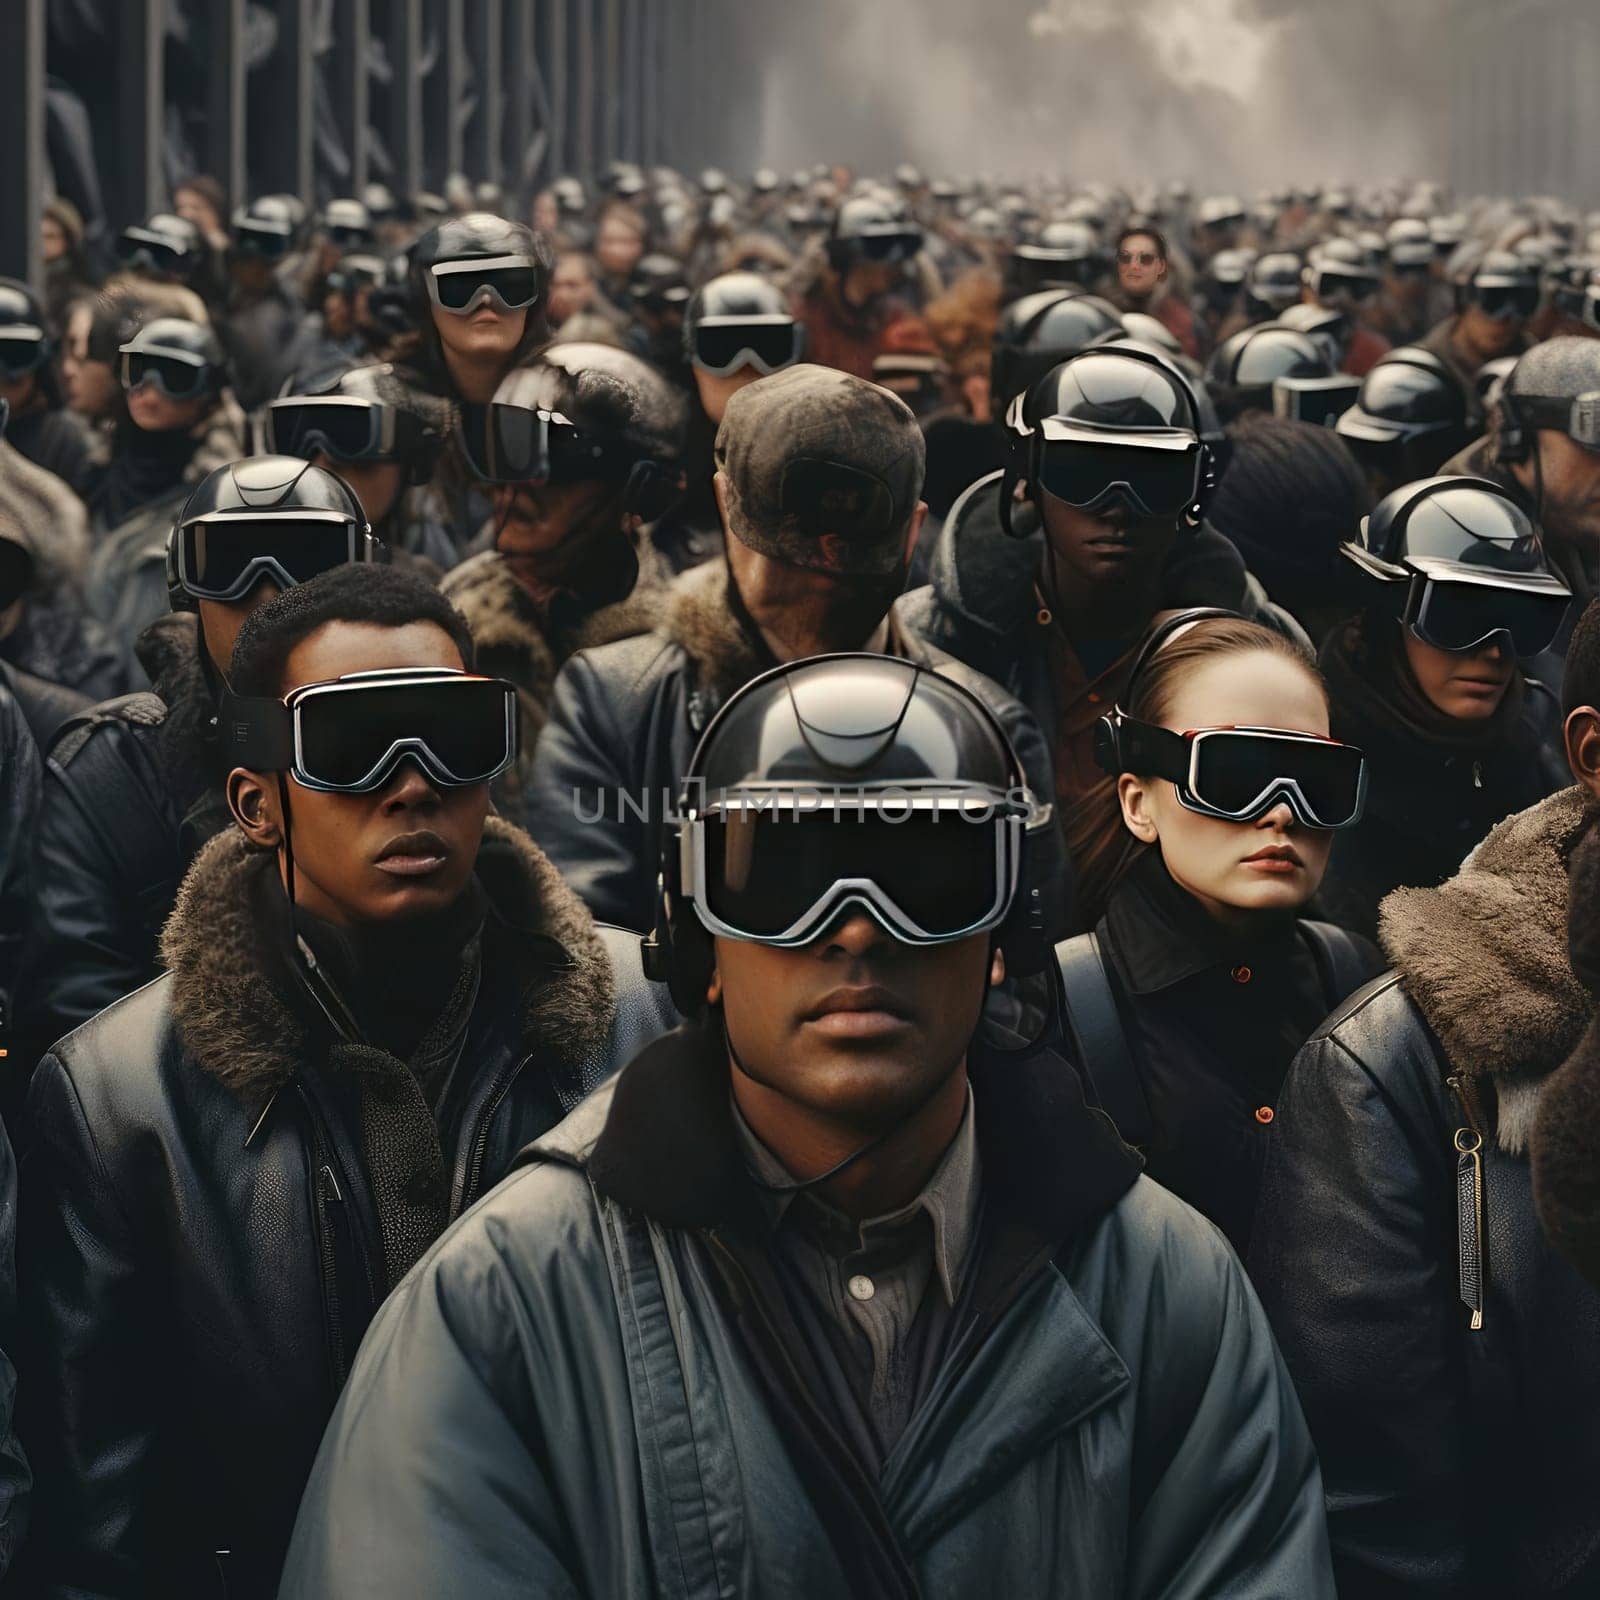 A large crowd of people wearing virtual glasses. A vision for the future